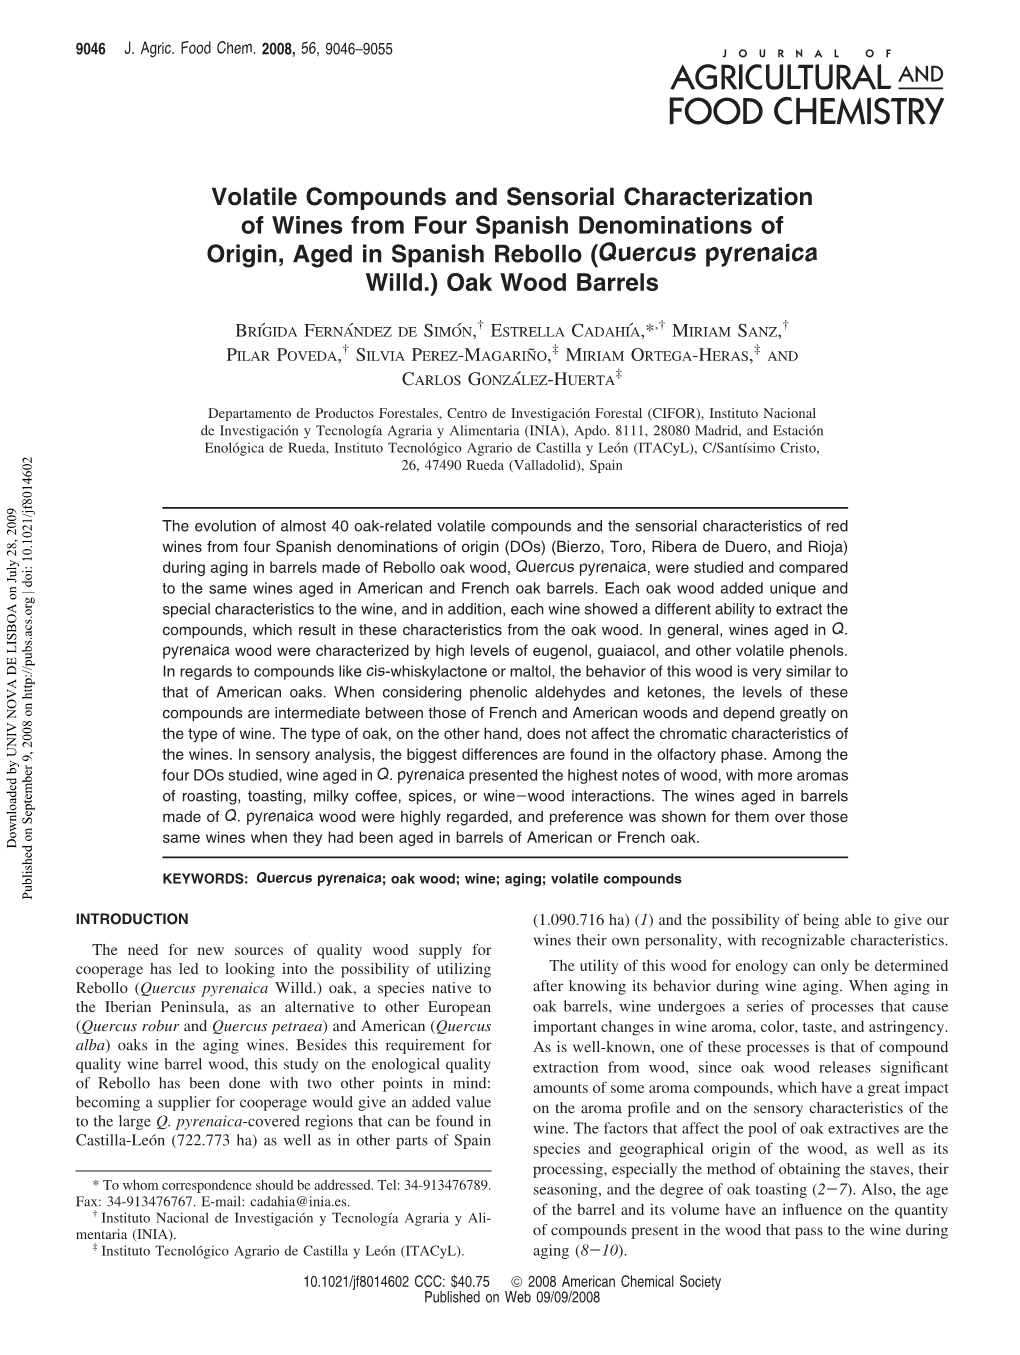 Volatile Compounds and Sensorial Characterization of Wines from Four